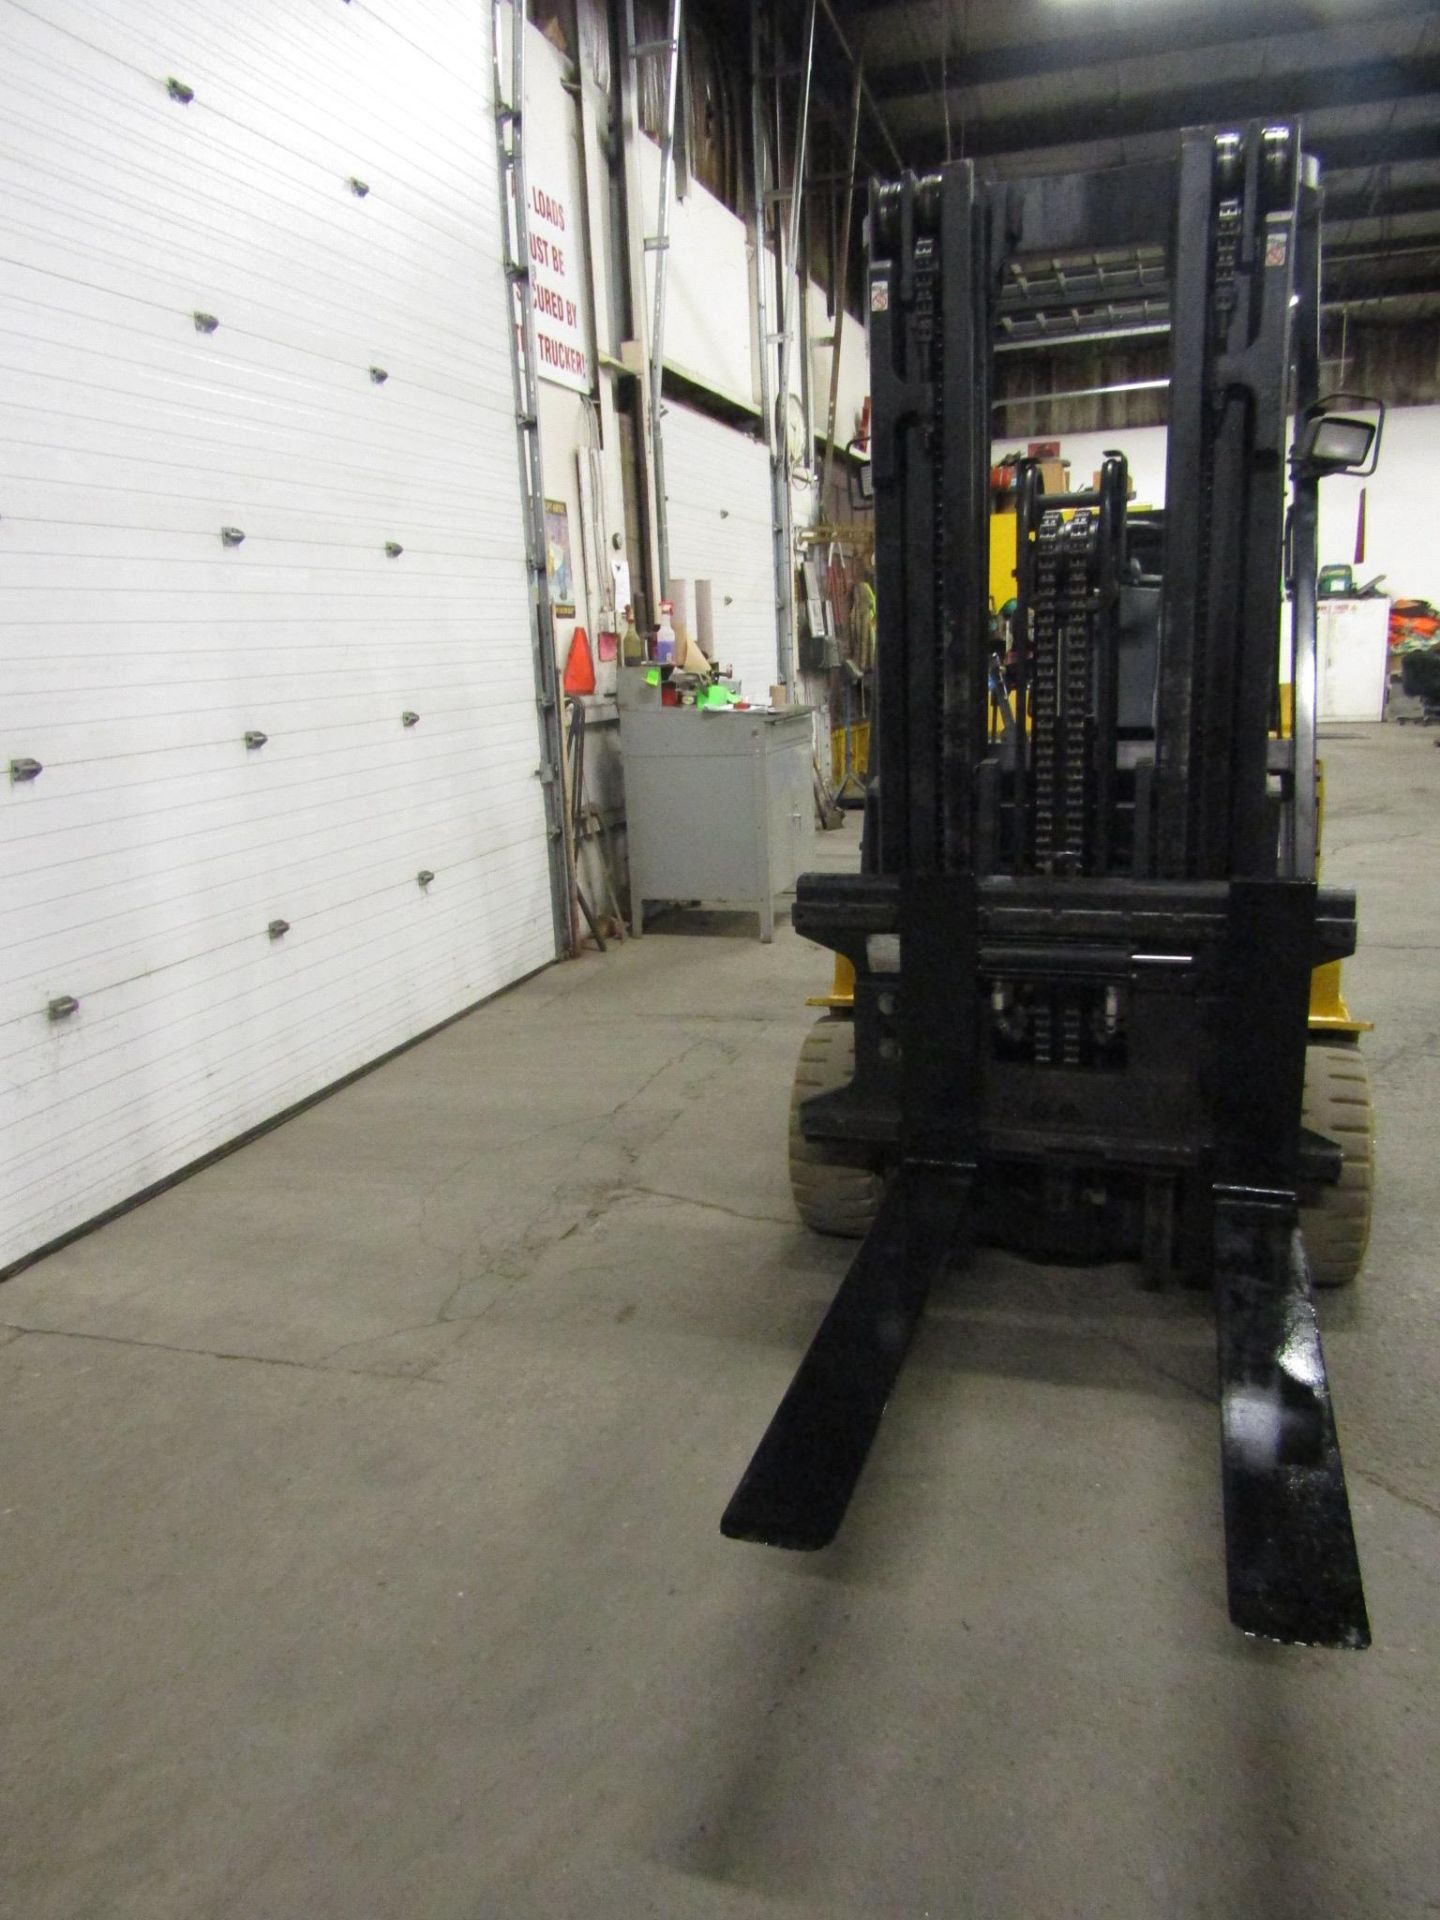 FREE CUSTOMS - Yale 8000lbs Electric Forklift with sideshift and 3-stage mast 48V - Image 2 of 2